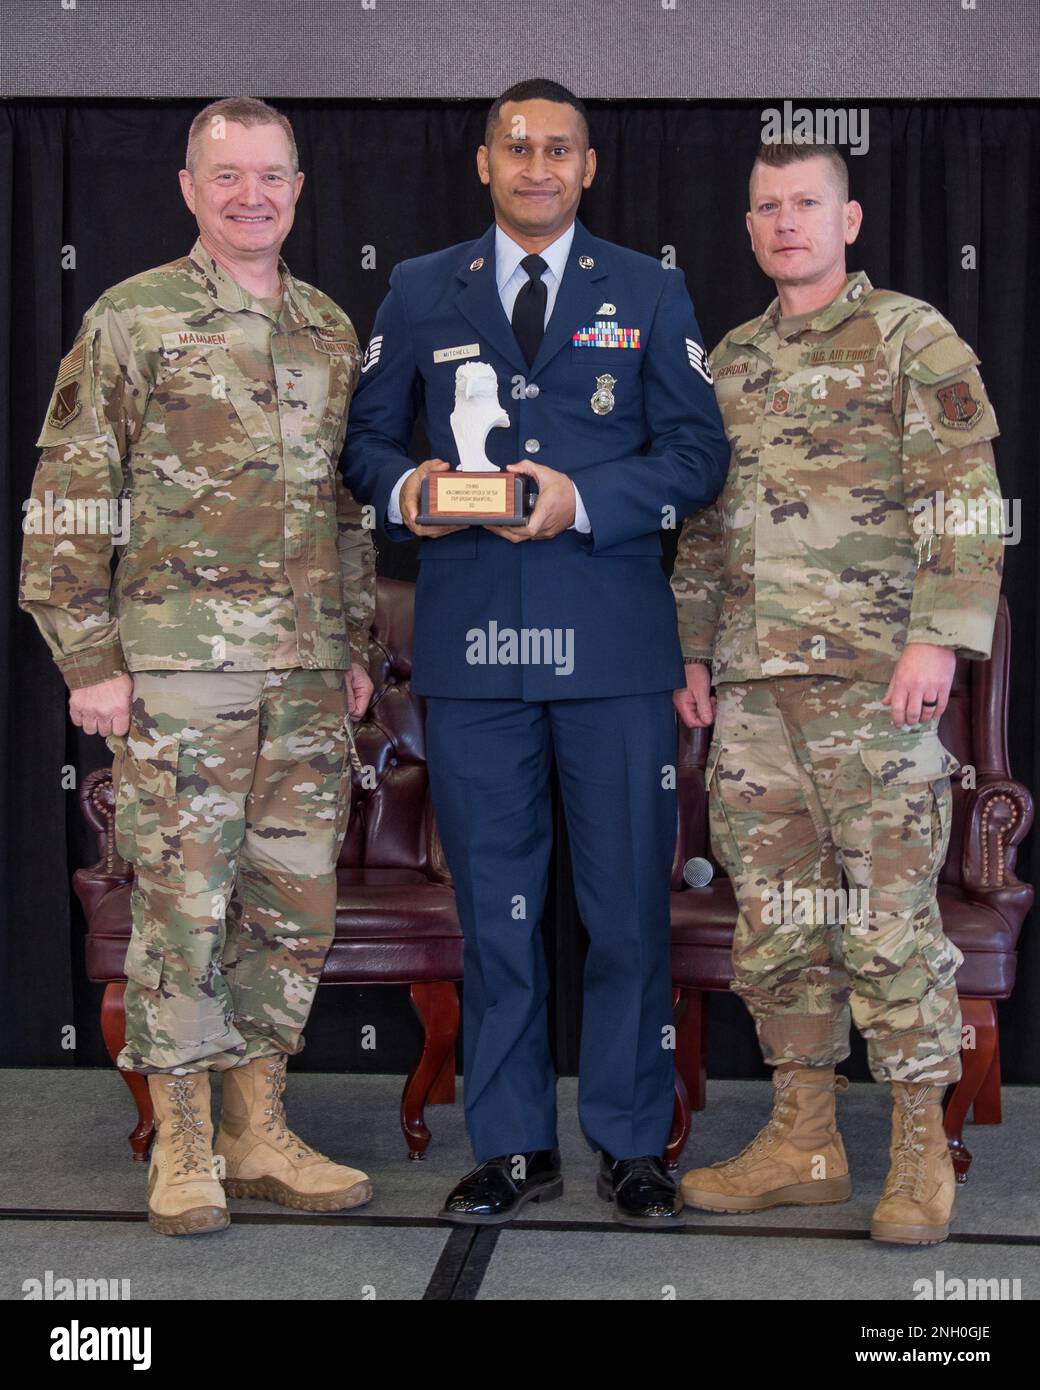 Brig. Gen. Rolf Mammen, 127th Wing commander, Staff Sgt. Brian Mitchell, defender, 127th Security Forces Squadron and Chief Master Sgt. Rick Gordon, 127th Wing command chief, based in Selfridge Air National Guard Base, Michigan, pose after awarding Mitchell the Wing’s outstanding non-commissioned officer of the year award. Mitchell and seven other individuals were awarded in different categories based on rank and will advance to the Michigan Air National Guard competition. Stock Photo